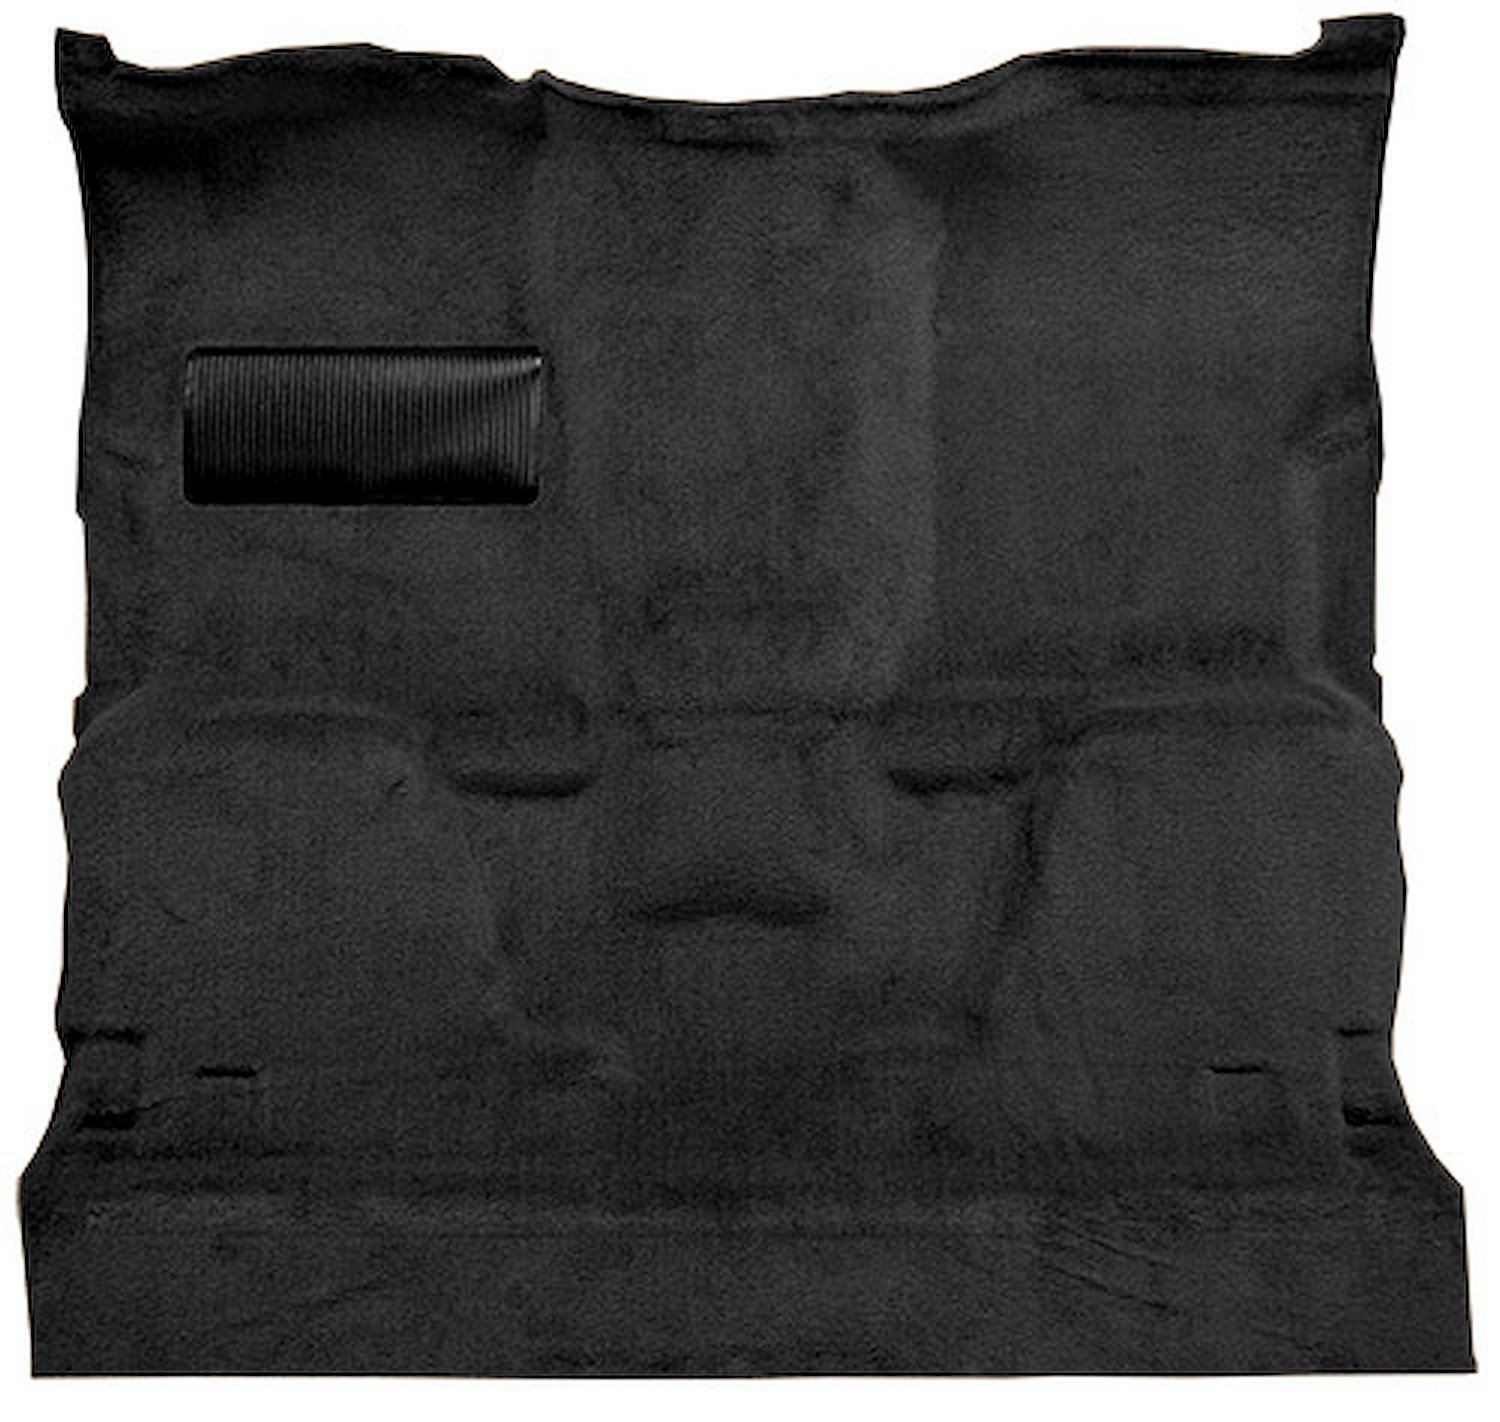 Molded Cut Pile Carpet for 1987 Chevrolet/GMC R Series Truck [Mass Backing, 1-Piece, Black]